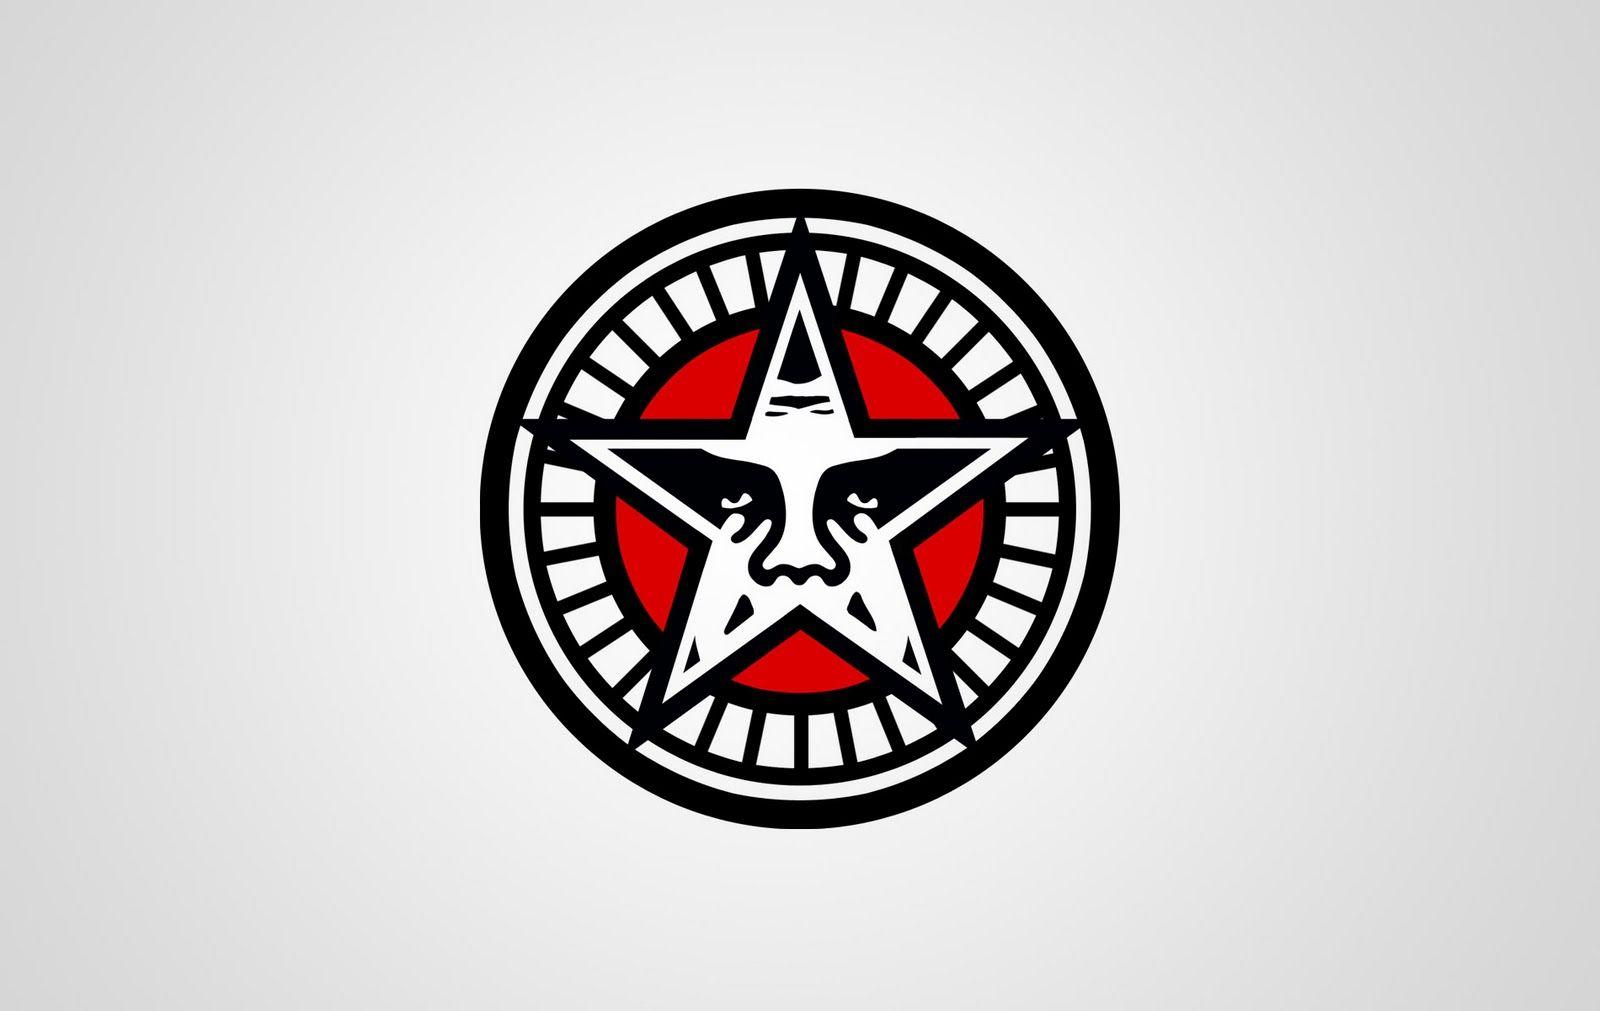 Obey Giant Logo - Obey Giant Logos Gallery